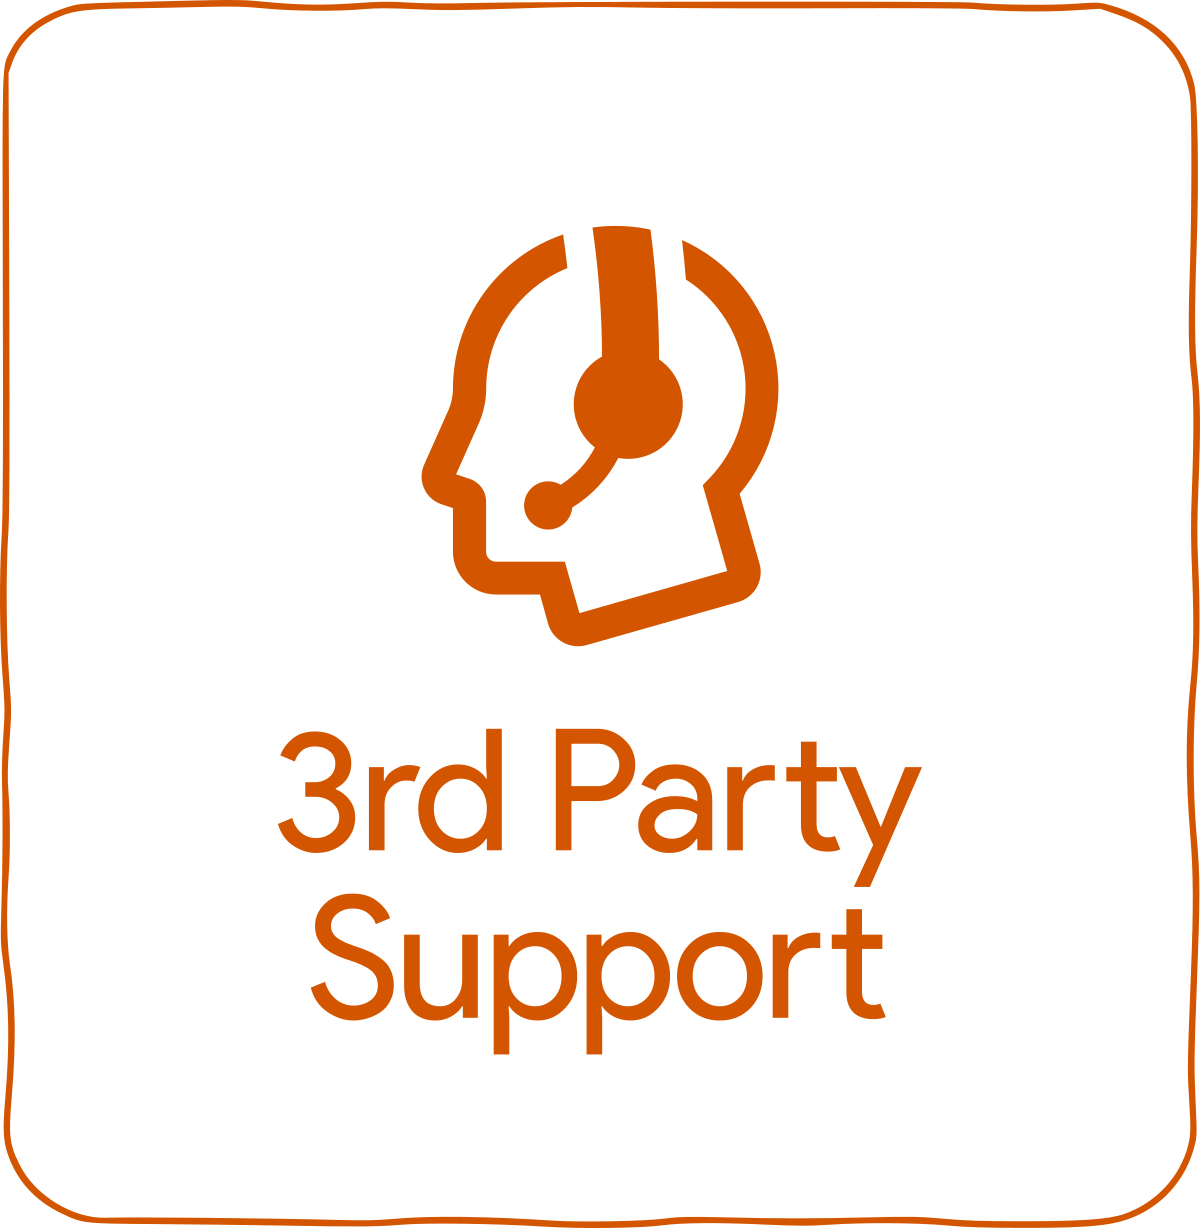 Third party support